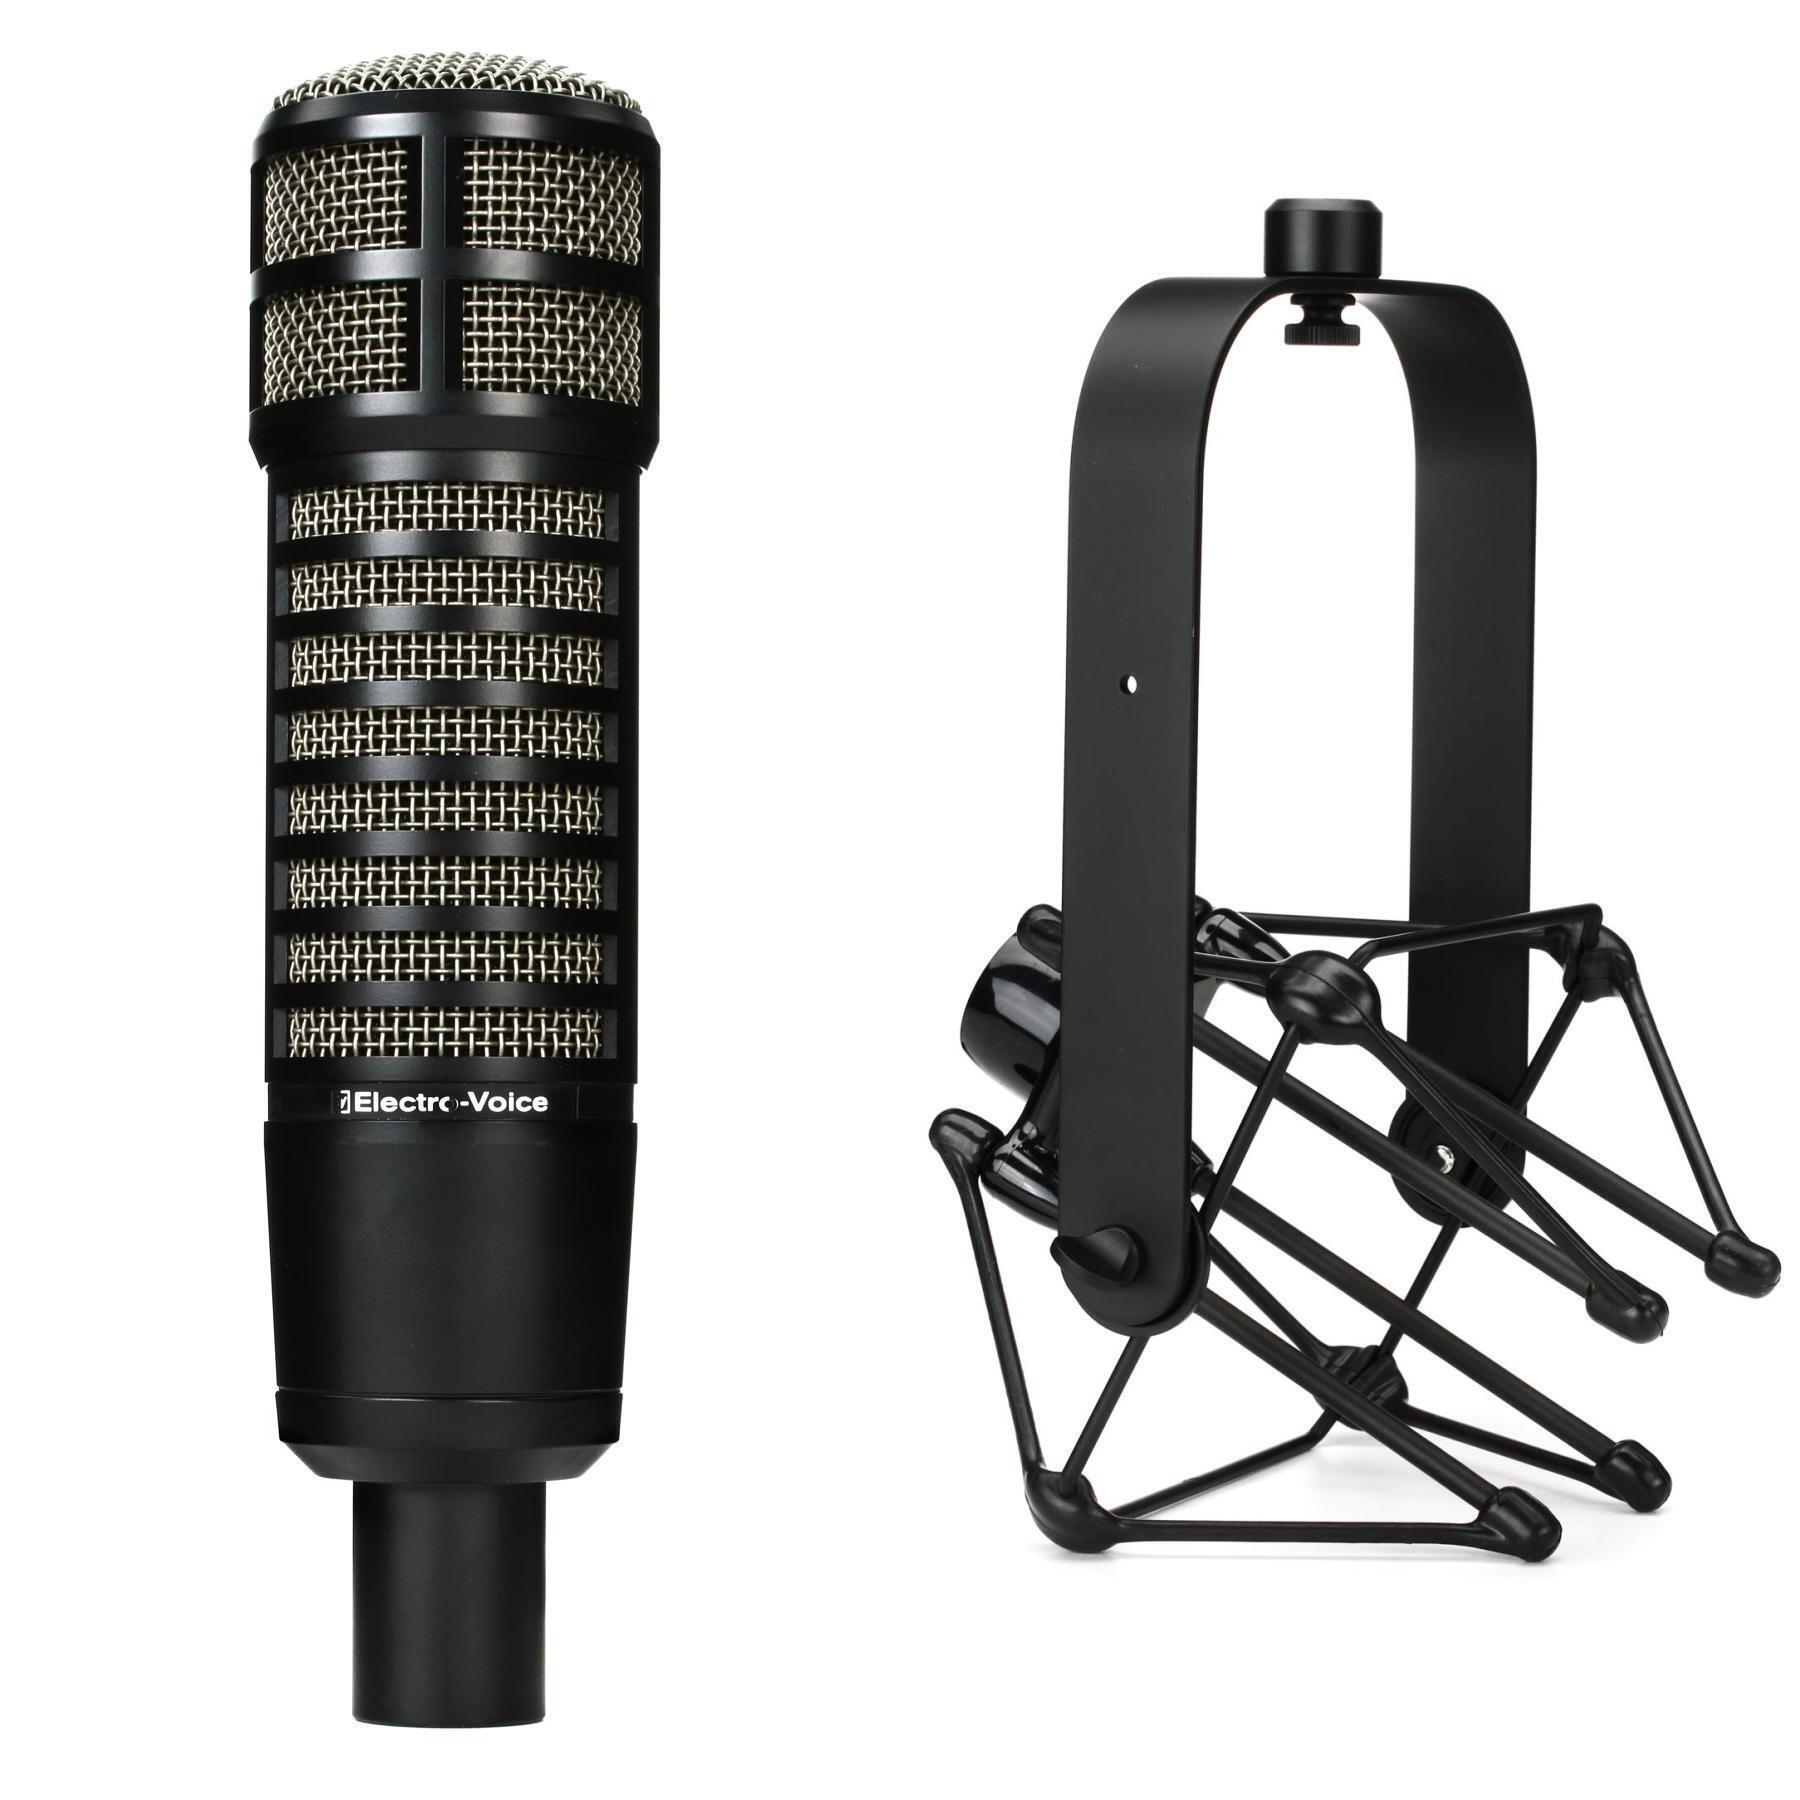 Electro-Voice RE320 Cardioid Dynamic Broadcast Microphone | Sweetwater